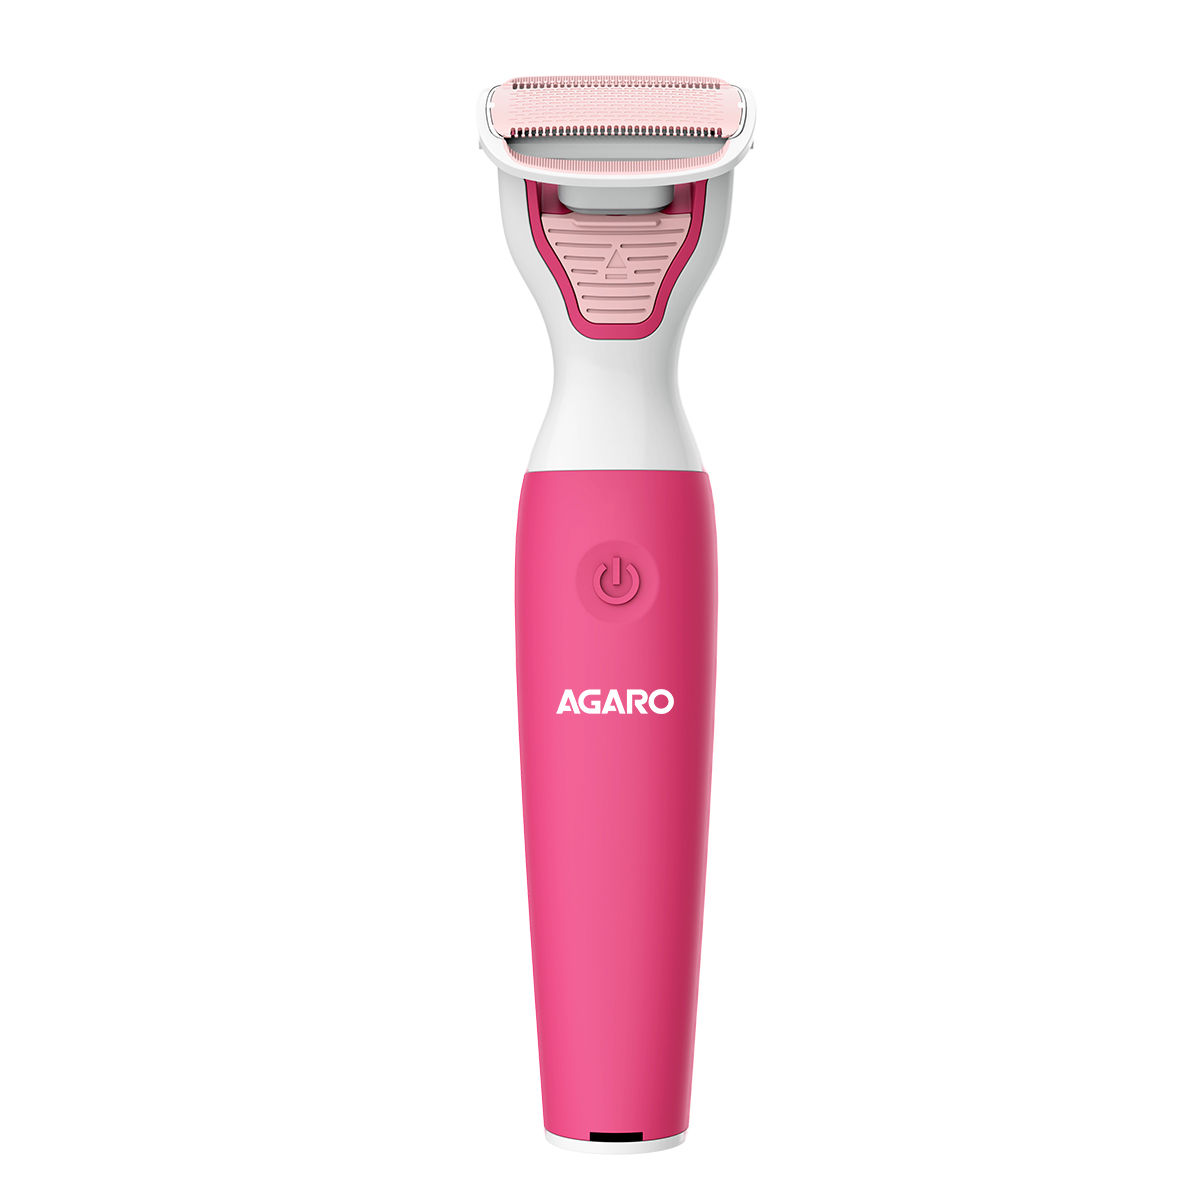 Agaro FT-2001 Female Groomer For Arms- Legs & Bikini Area With Rose Gold Blades (Pink)